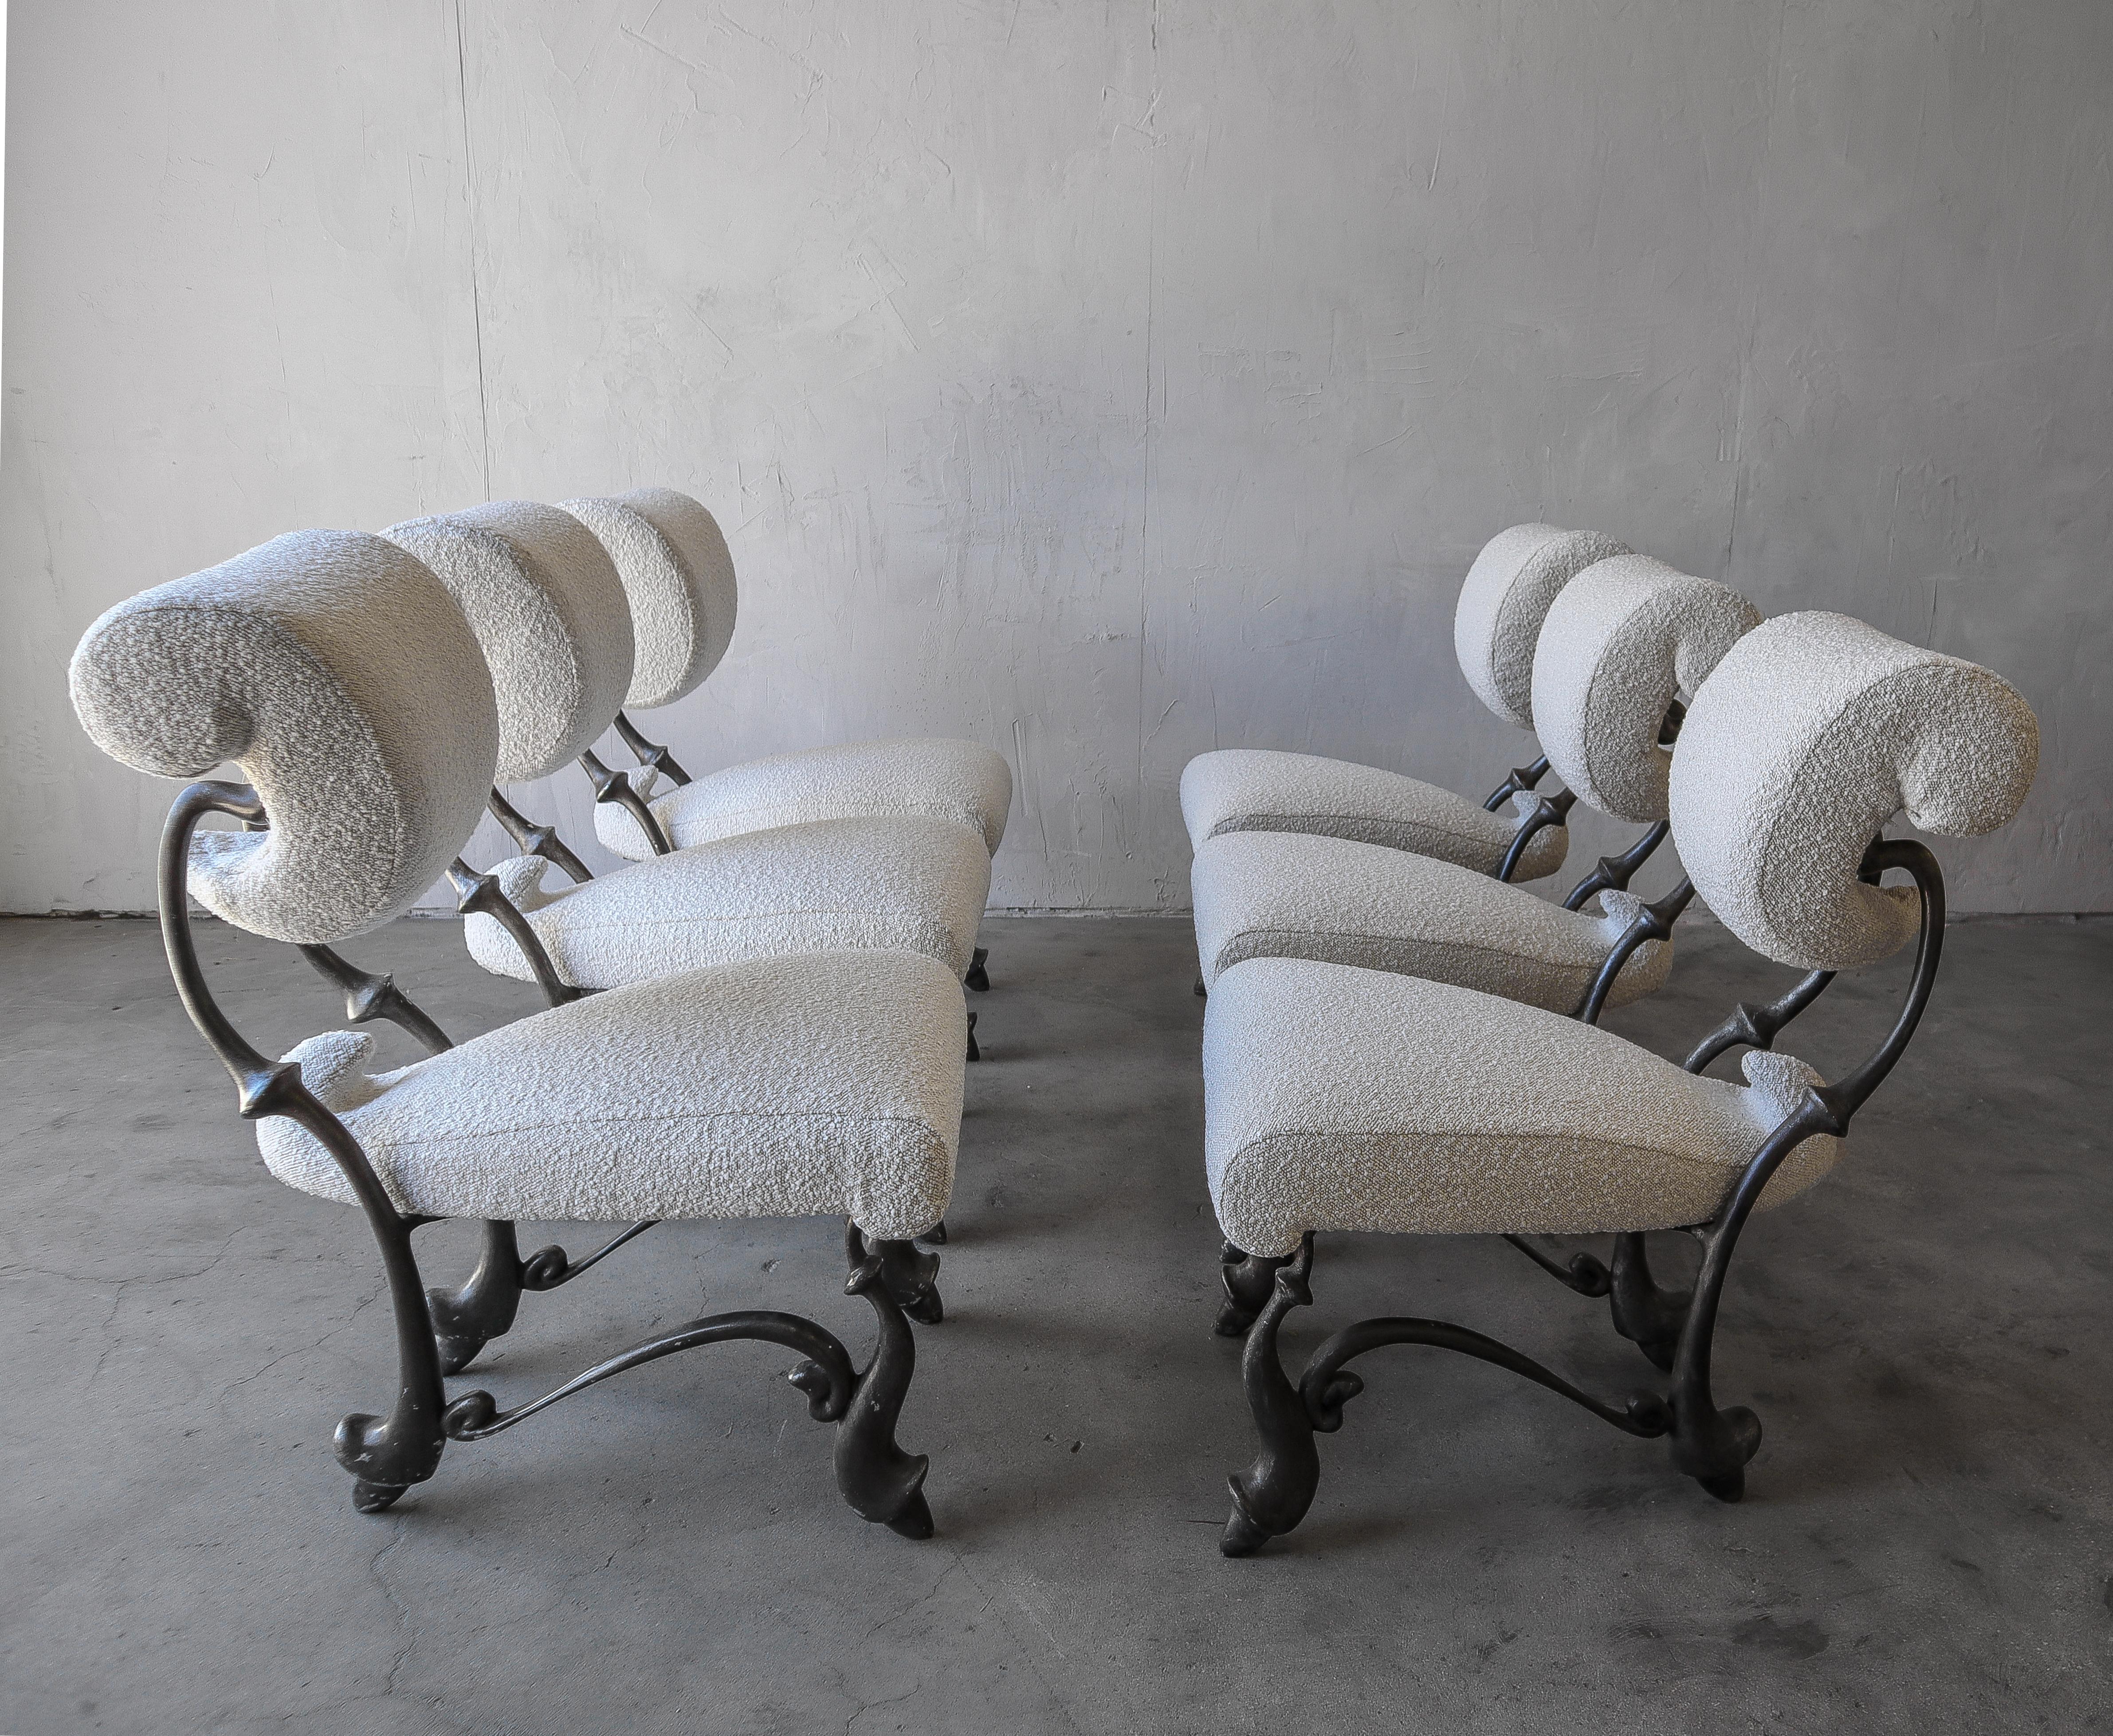 Absolutely incredible set of 6 Iridium ballet chairs, by Jordan Mozer. These chairs were created for the Iridium restaurant in New York in 1992. Cast out of solid, recycled aluminum-magnesium alloy, and upholstered in all new boucle